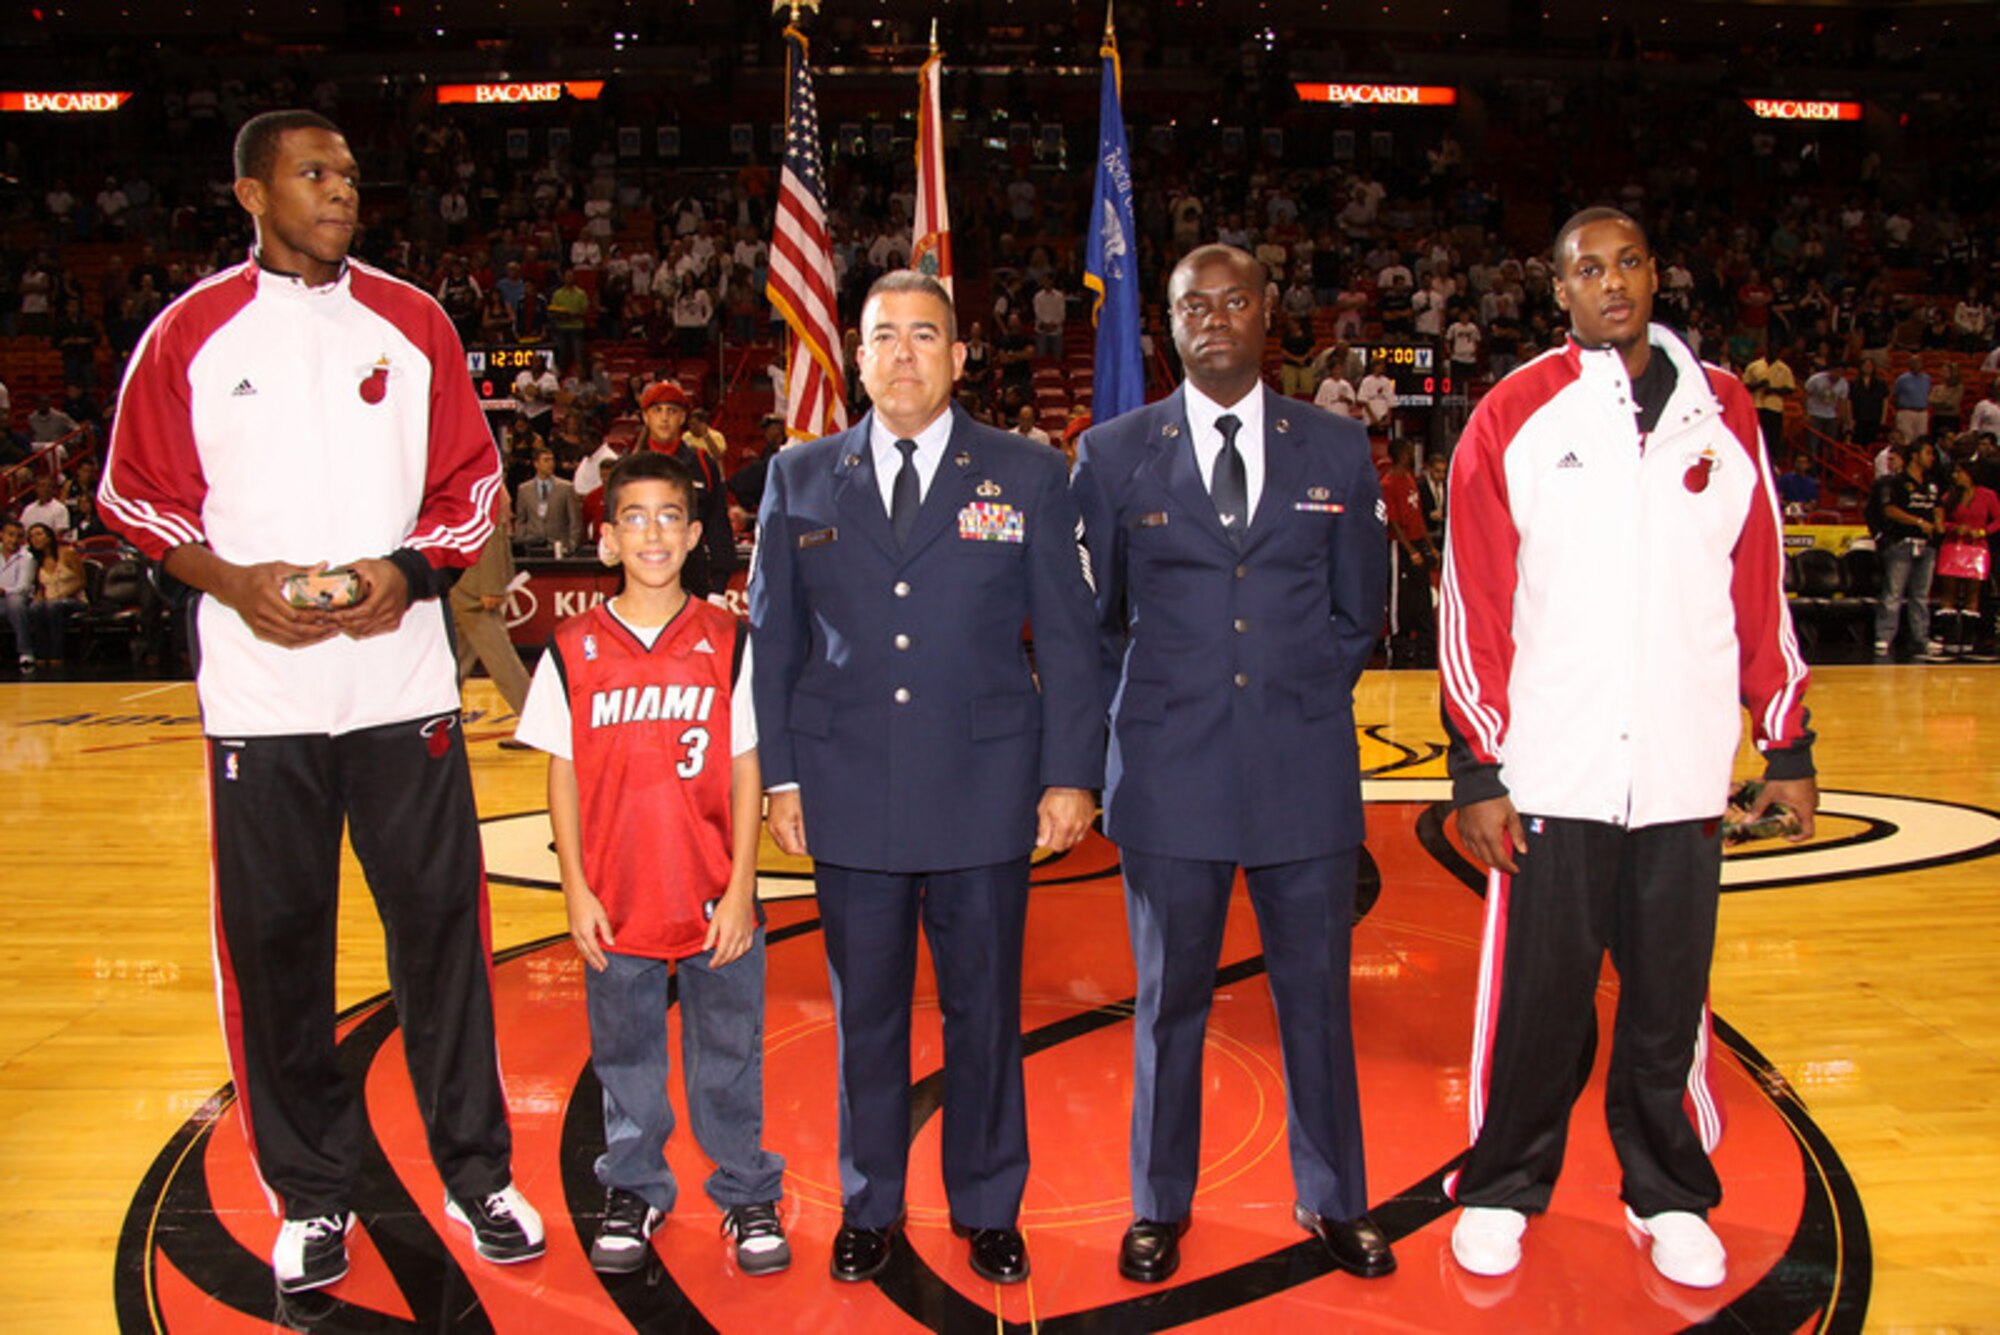 Senior Master Sgt. Antonio Romero (left) and Senior Airman James Jean (right), 93rd Fighter Squadron members, were recognized during the pre-game ceremony of the Miami Heat vs. New Orleans Hornets game as part of the team's “Home Strong” Program on Nov. 22.The program, championed by NBA Hall of Famer and Heat President Pat Riley, recognizes military members who served in Iraq or Afghanistan and praises the contributions of military families during each home game.During the ceremony, the Airmen were presented with Miami Heat championship customized dog tags by forward James Jones and guard Mario Chalmers. (Photo courtesy of the Miami Heat)